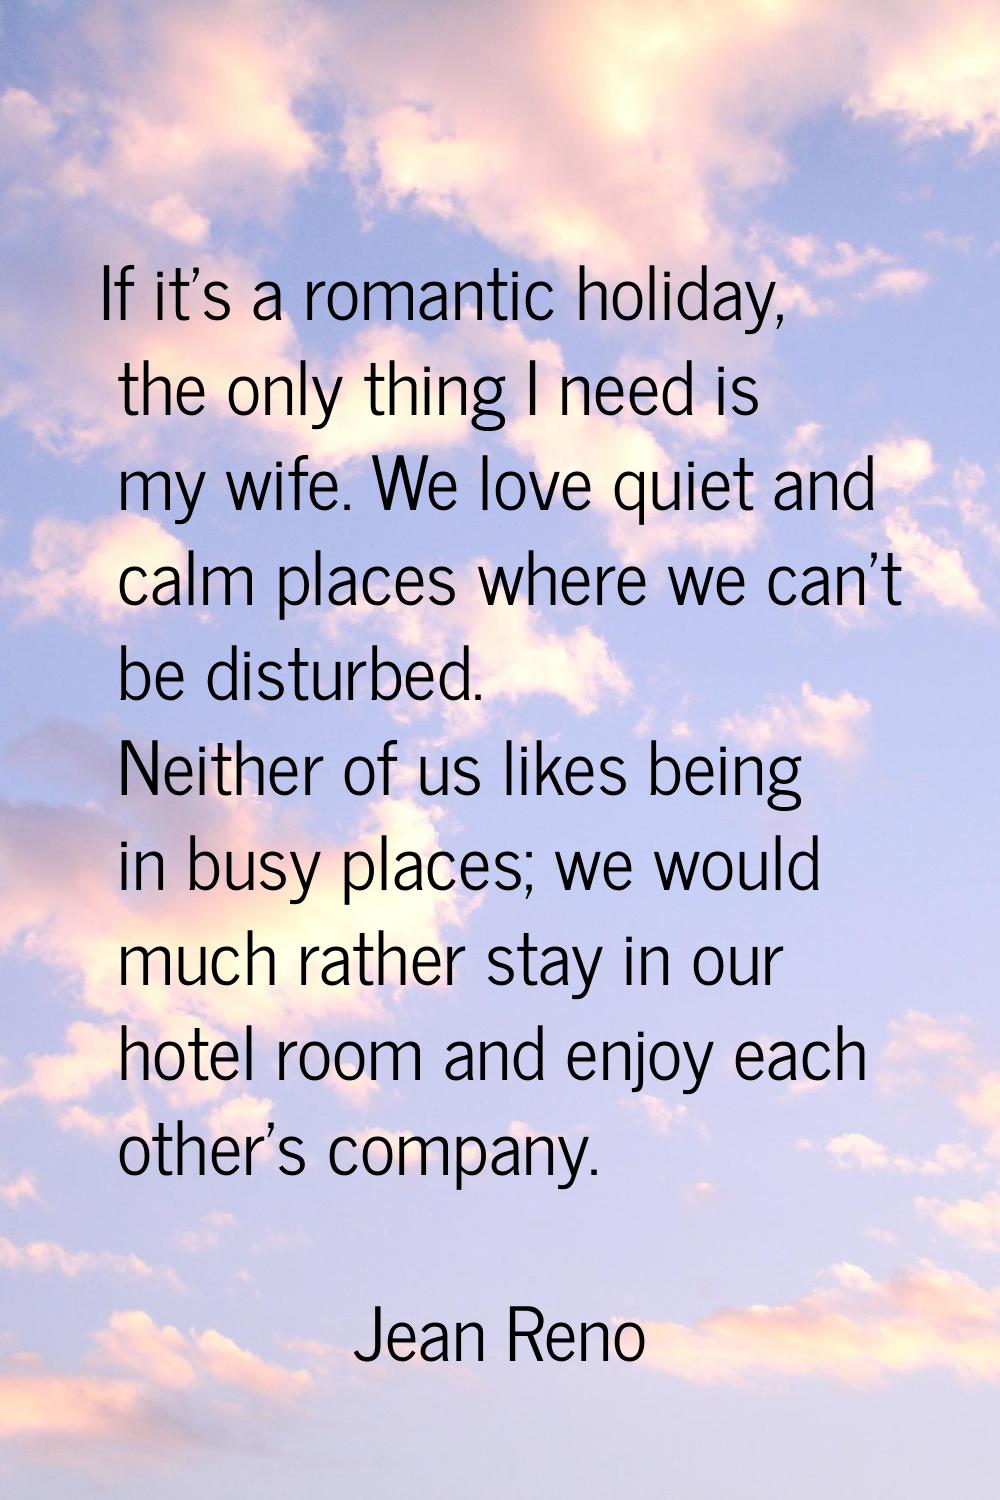 If it's a romantic holiday, the only thing I need is my wife. We love quiet and calm places where w